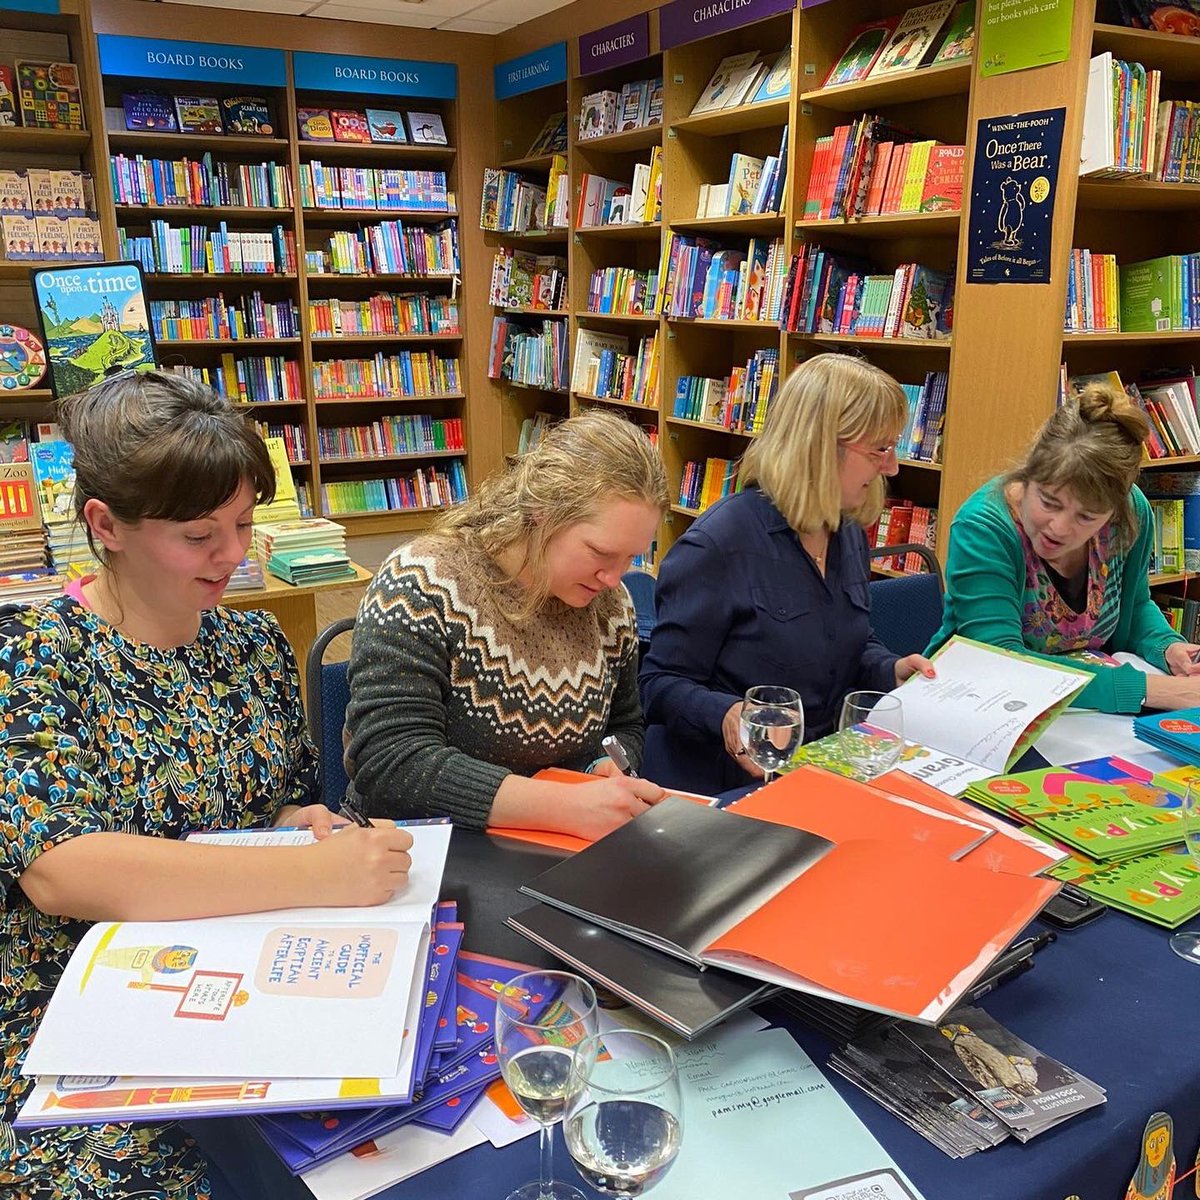 Thanks to everyone who came to our @heffersbookshop launch last week!! Celebrating publication of our new books with @l_winstone @FionaFoggDraws @Scallywagpress @cicadabooks @WalkerBooksUK #deborahchancellor